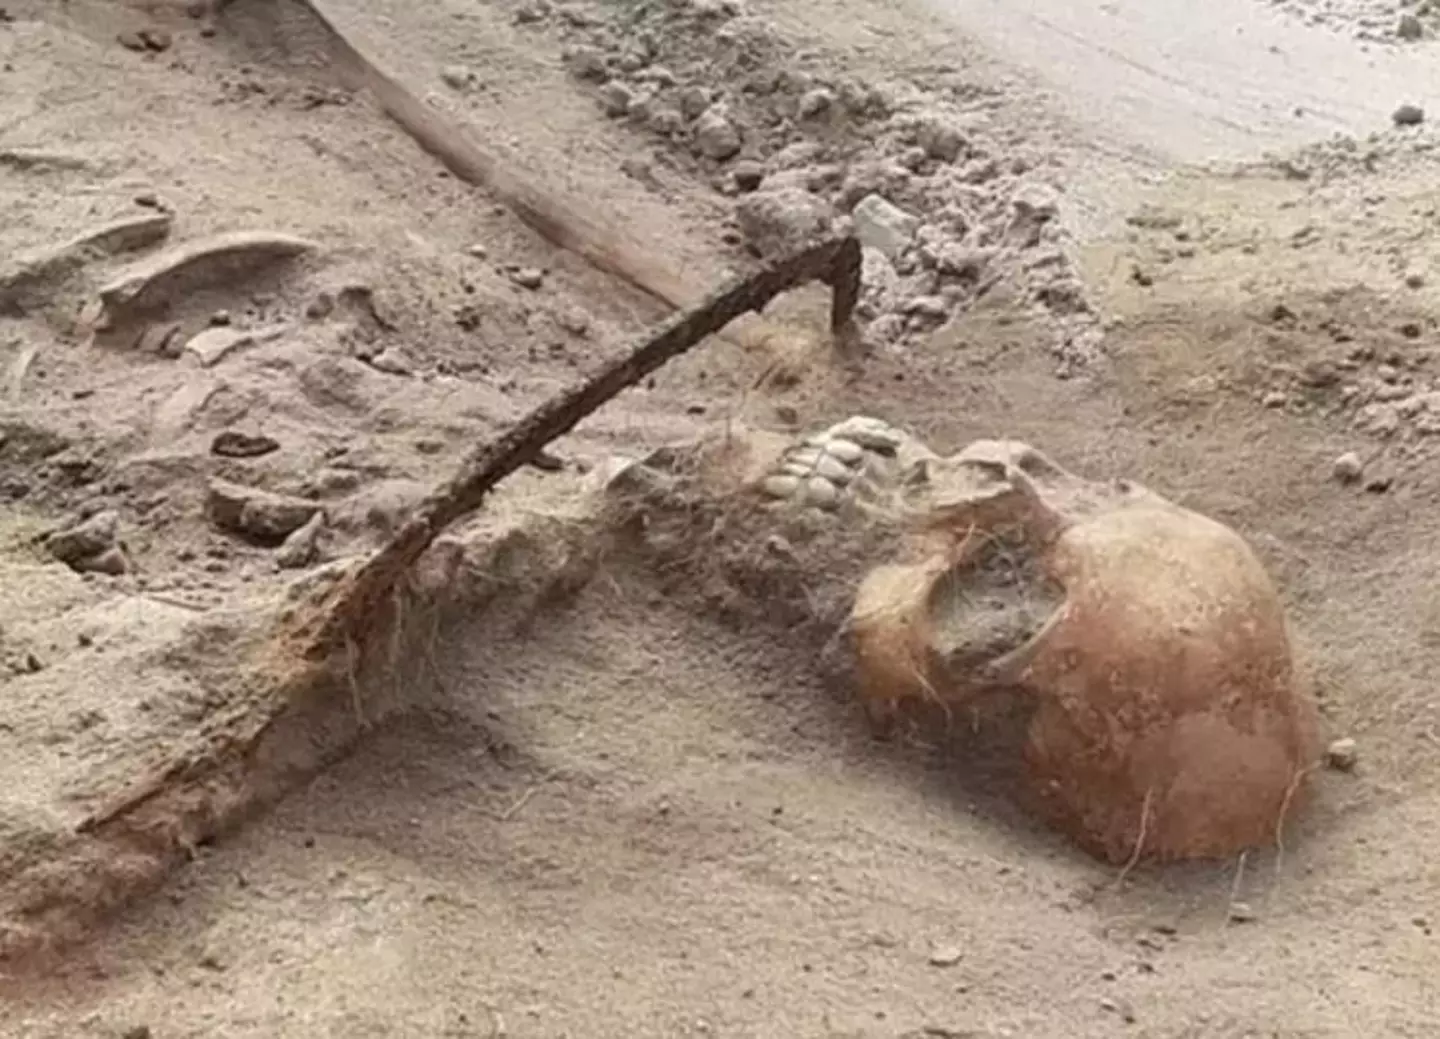 A 2015 dig discovered the skeletons of several men who were also buried with a sickle over their throat.